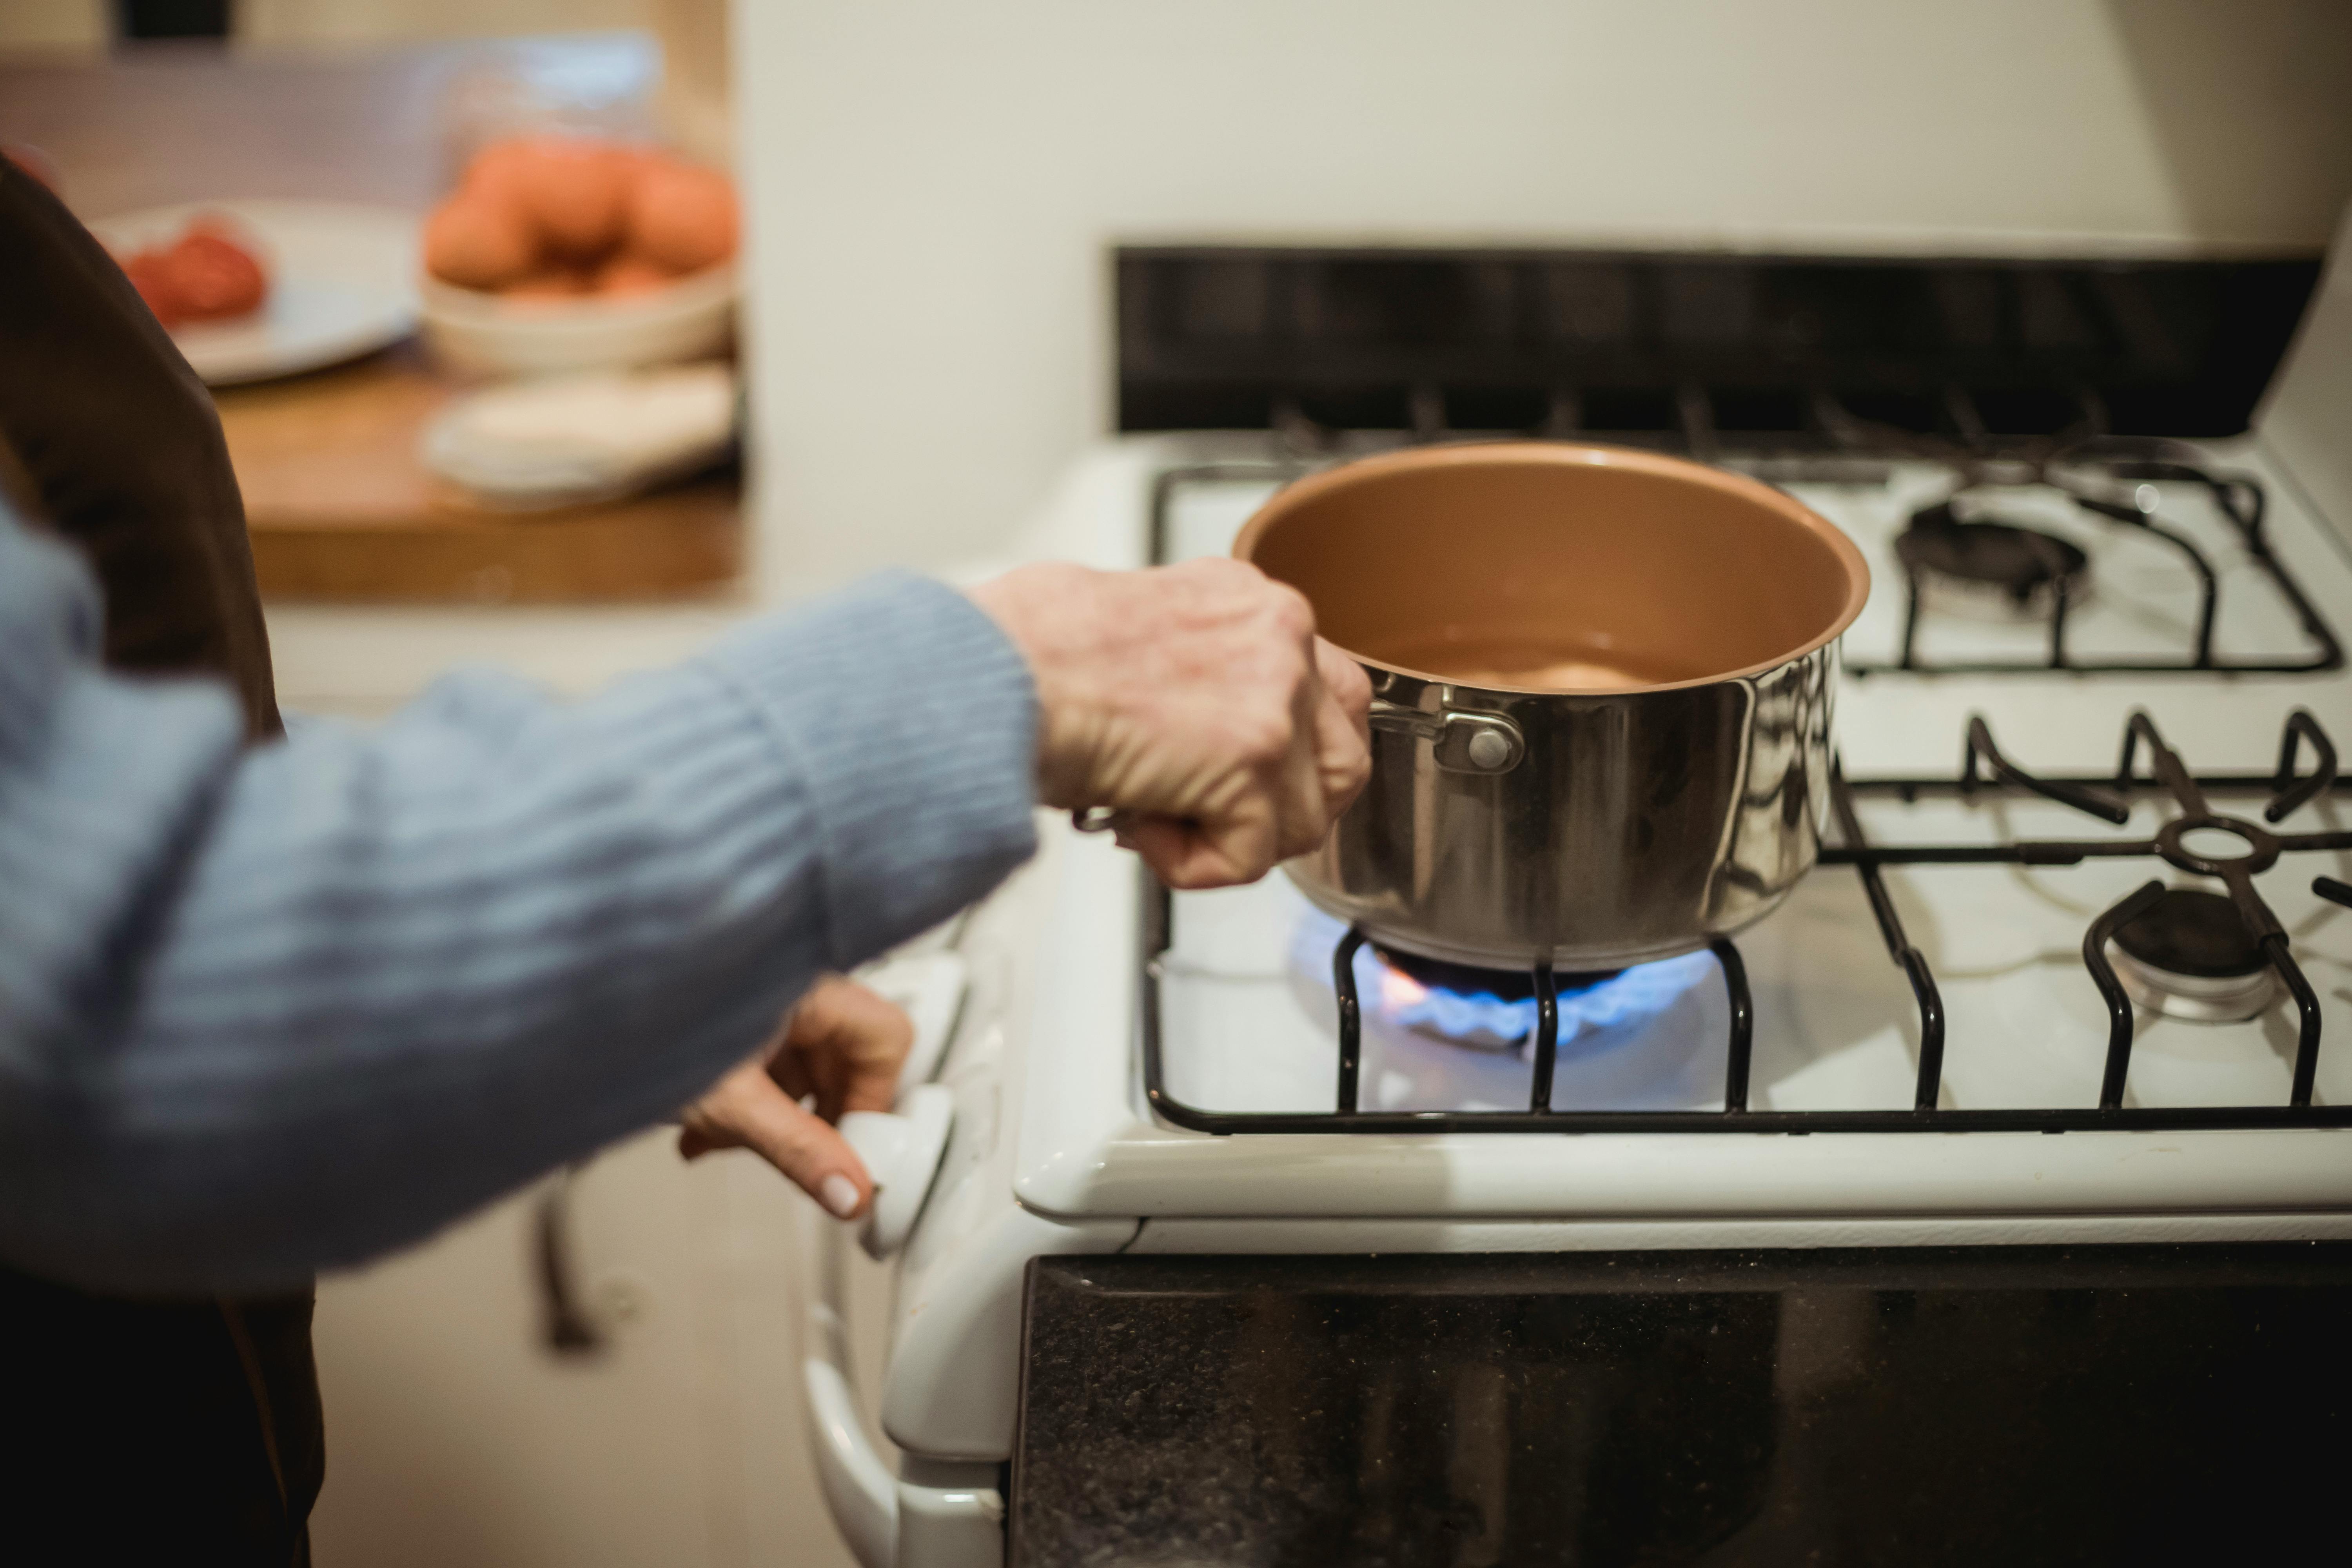 Eggs In Boiling Water On Kitchen Electric Stovetop Oven Burner Stock Photo  - Download Image Now - iStock